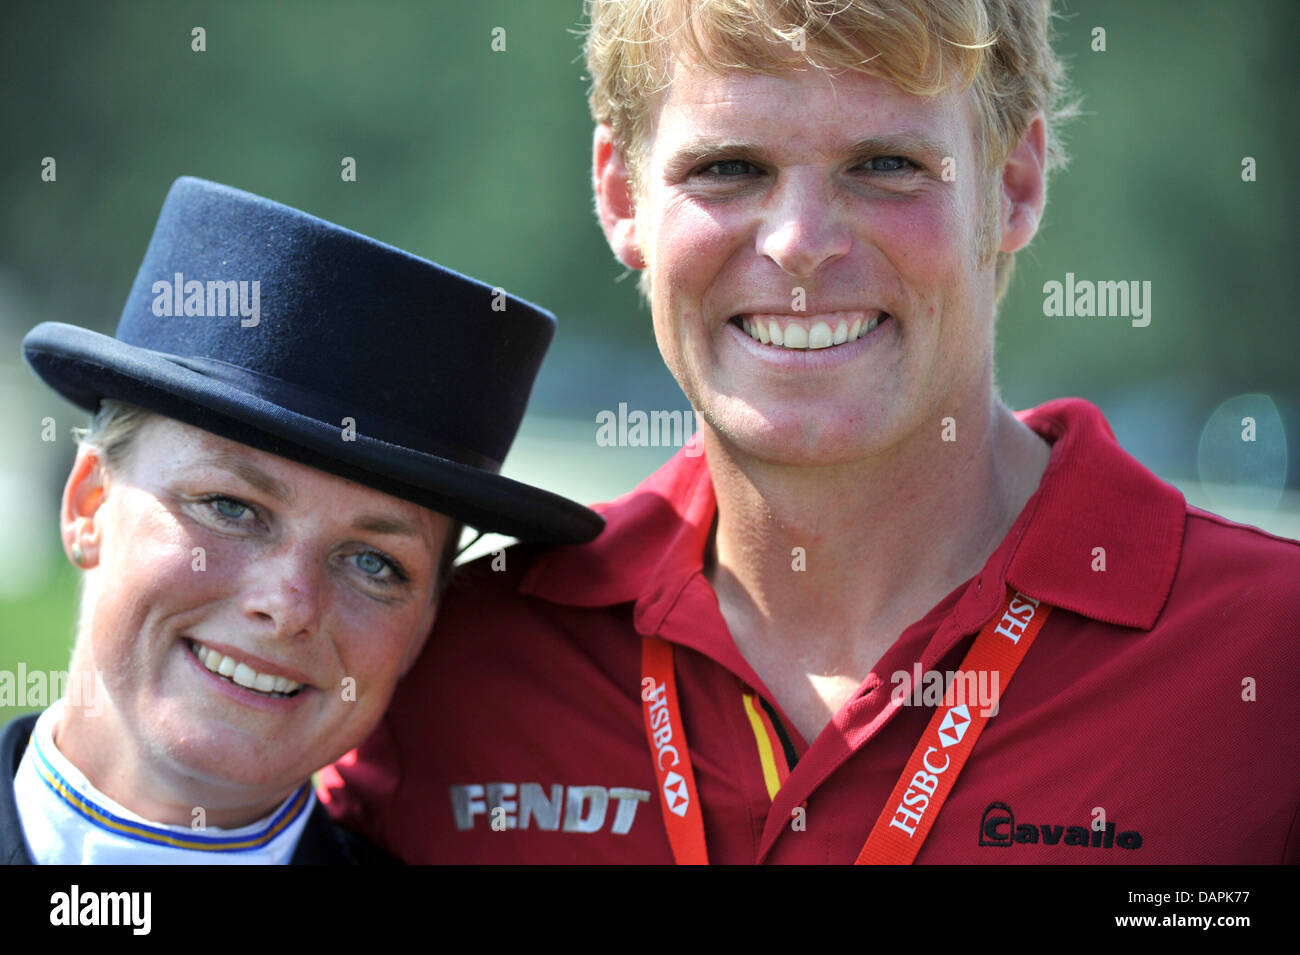 The German eventing equestrian Frank Osthold and his wife Sara Algotsson-Osthold, starting for Sweden, pose after their dressage tournament of the European Eventing Championship in Luhmuehlen, Germany, 25 August 2011. 70 Equestrians from 14 nations will compete in the dressage, cross-country and show jumping until 28 August 2011. Photo: JOCHEN LUEBKE Stock Photo